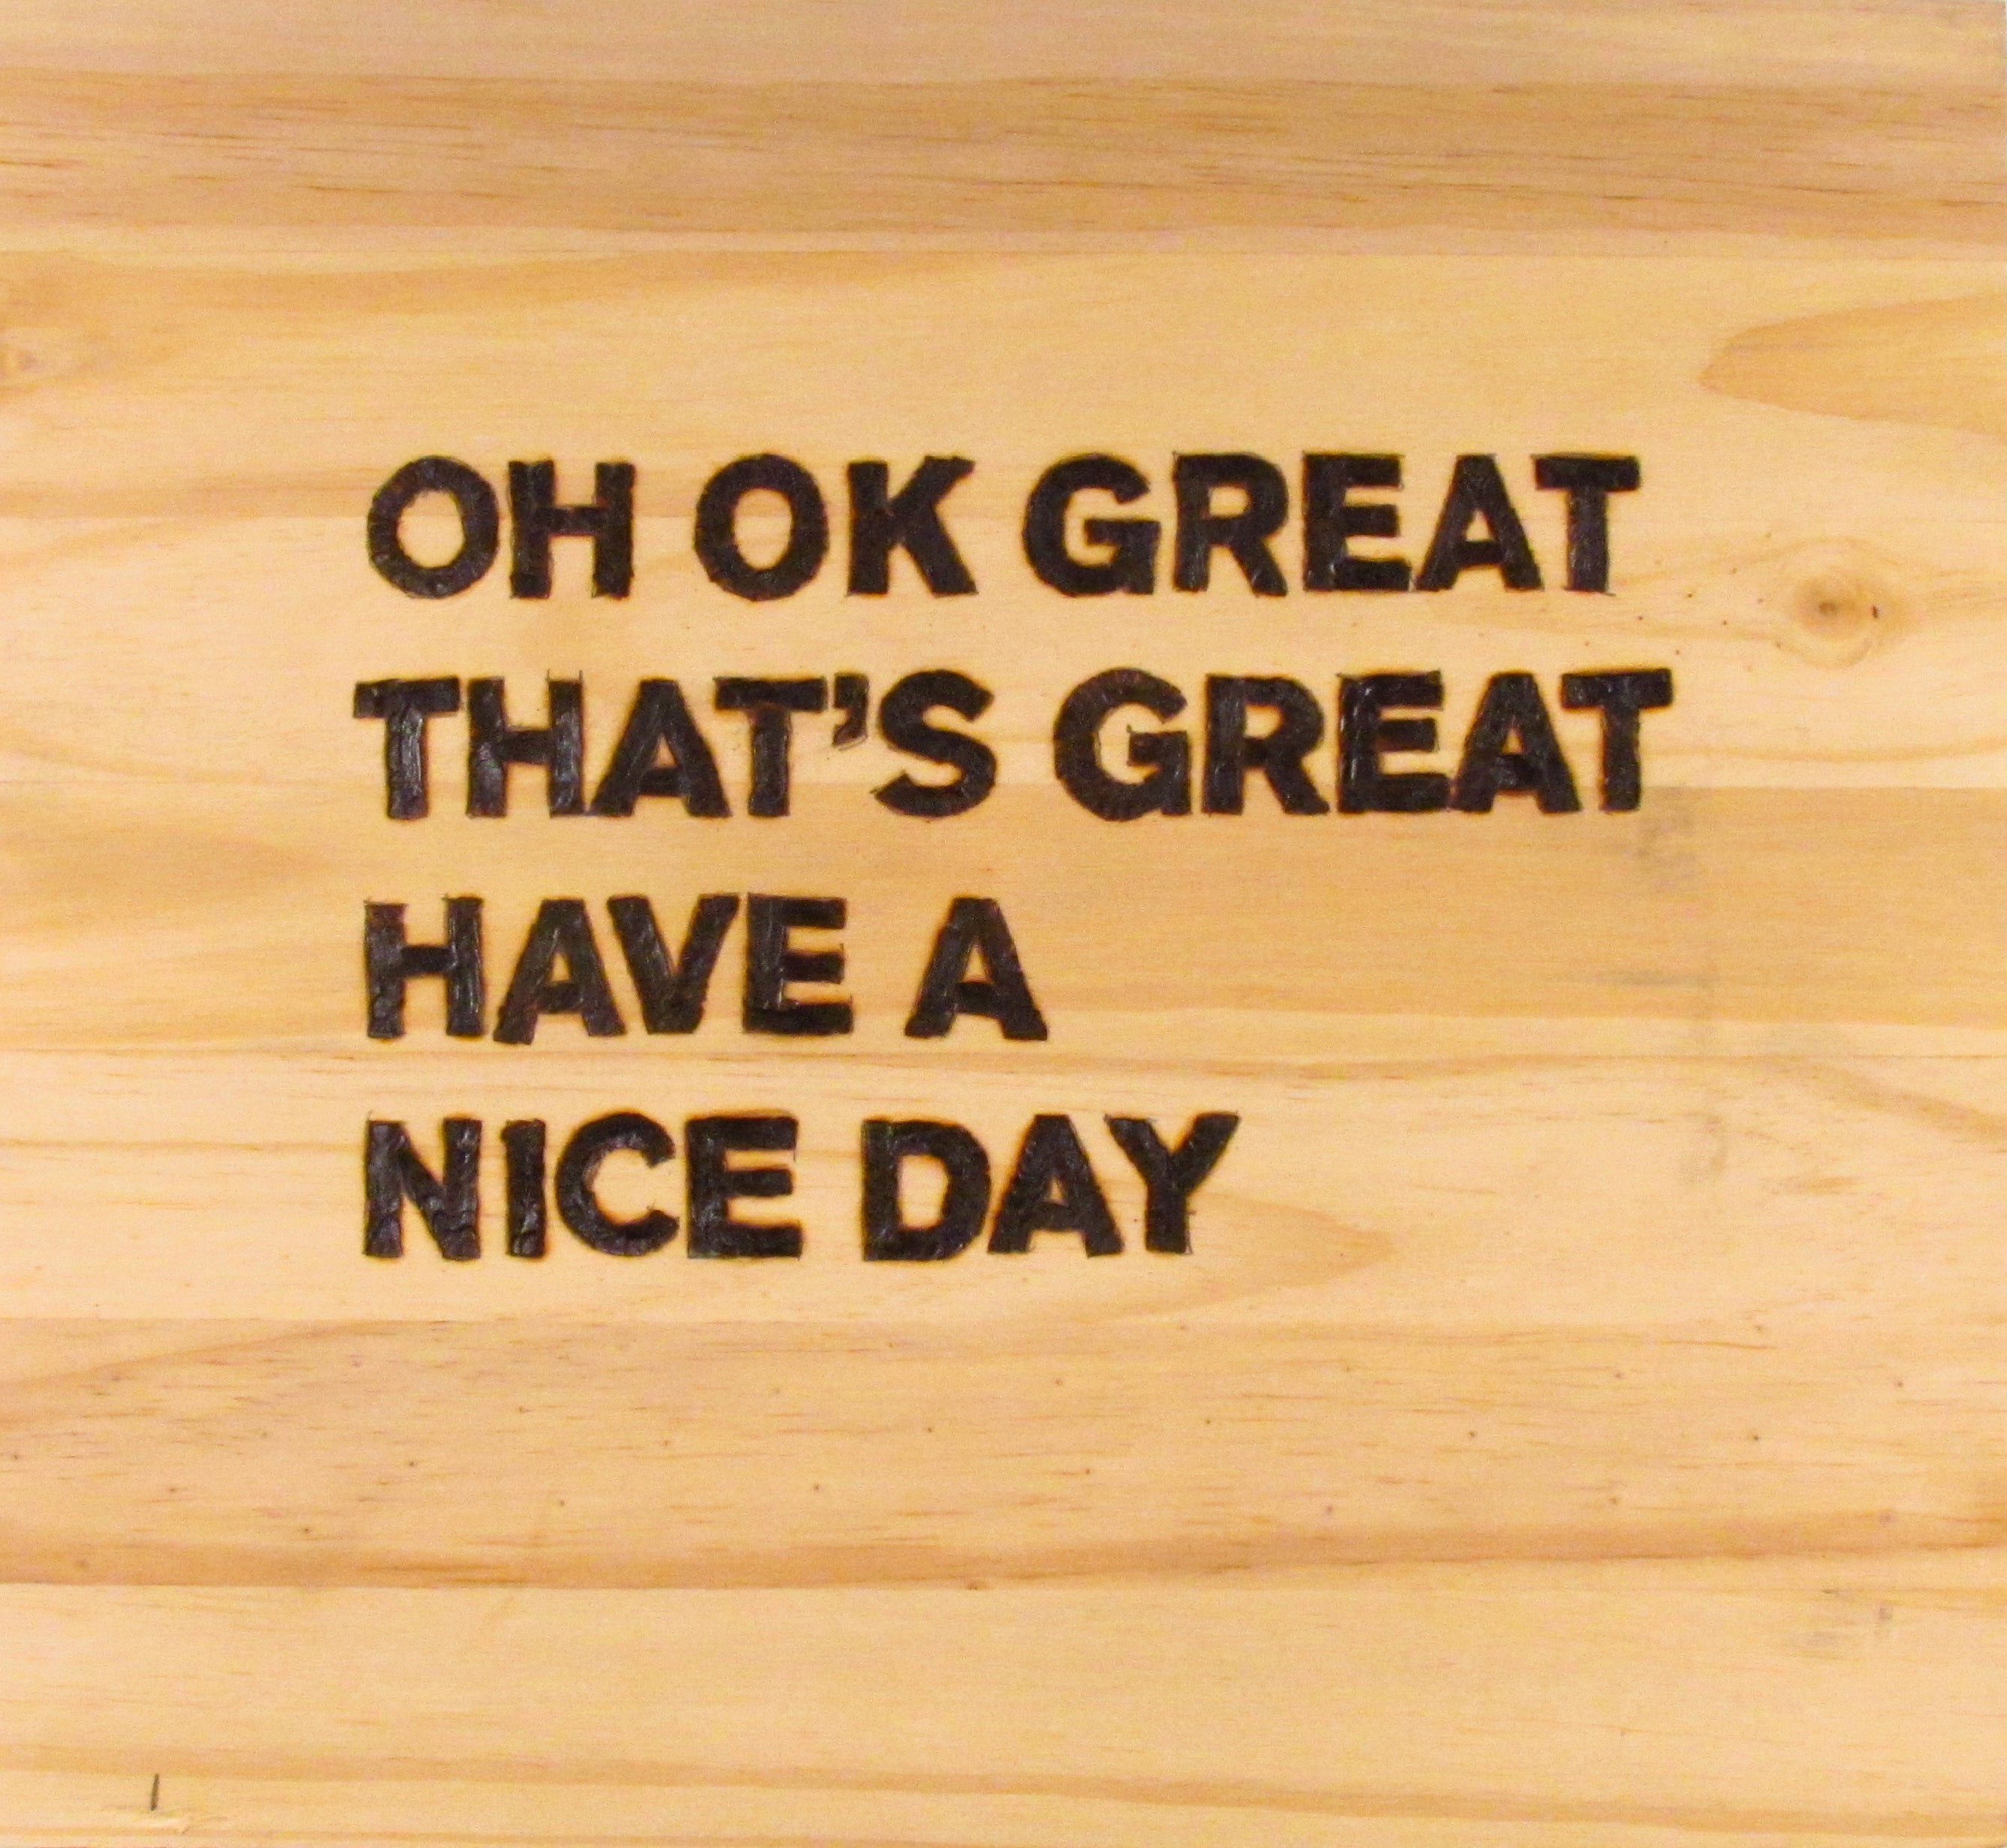 HAVE A NICE DAY - wood panel